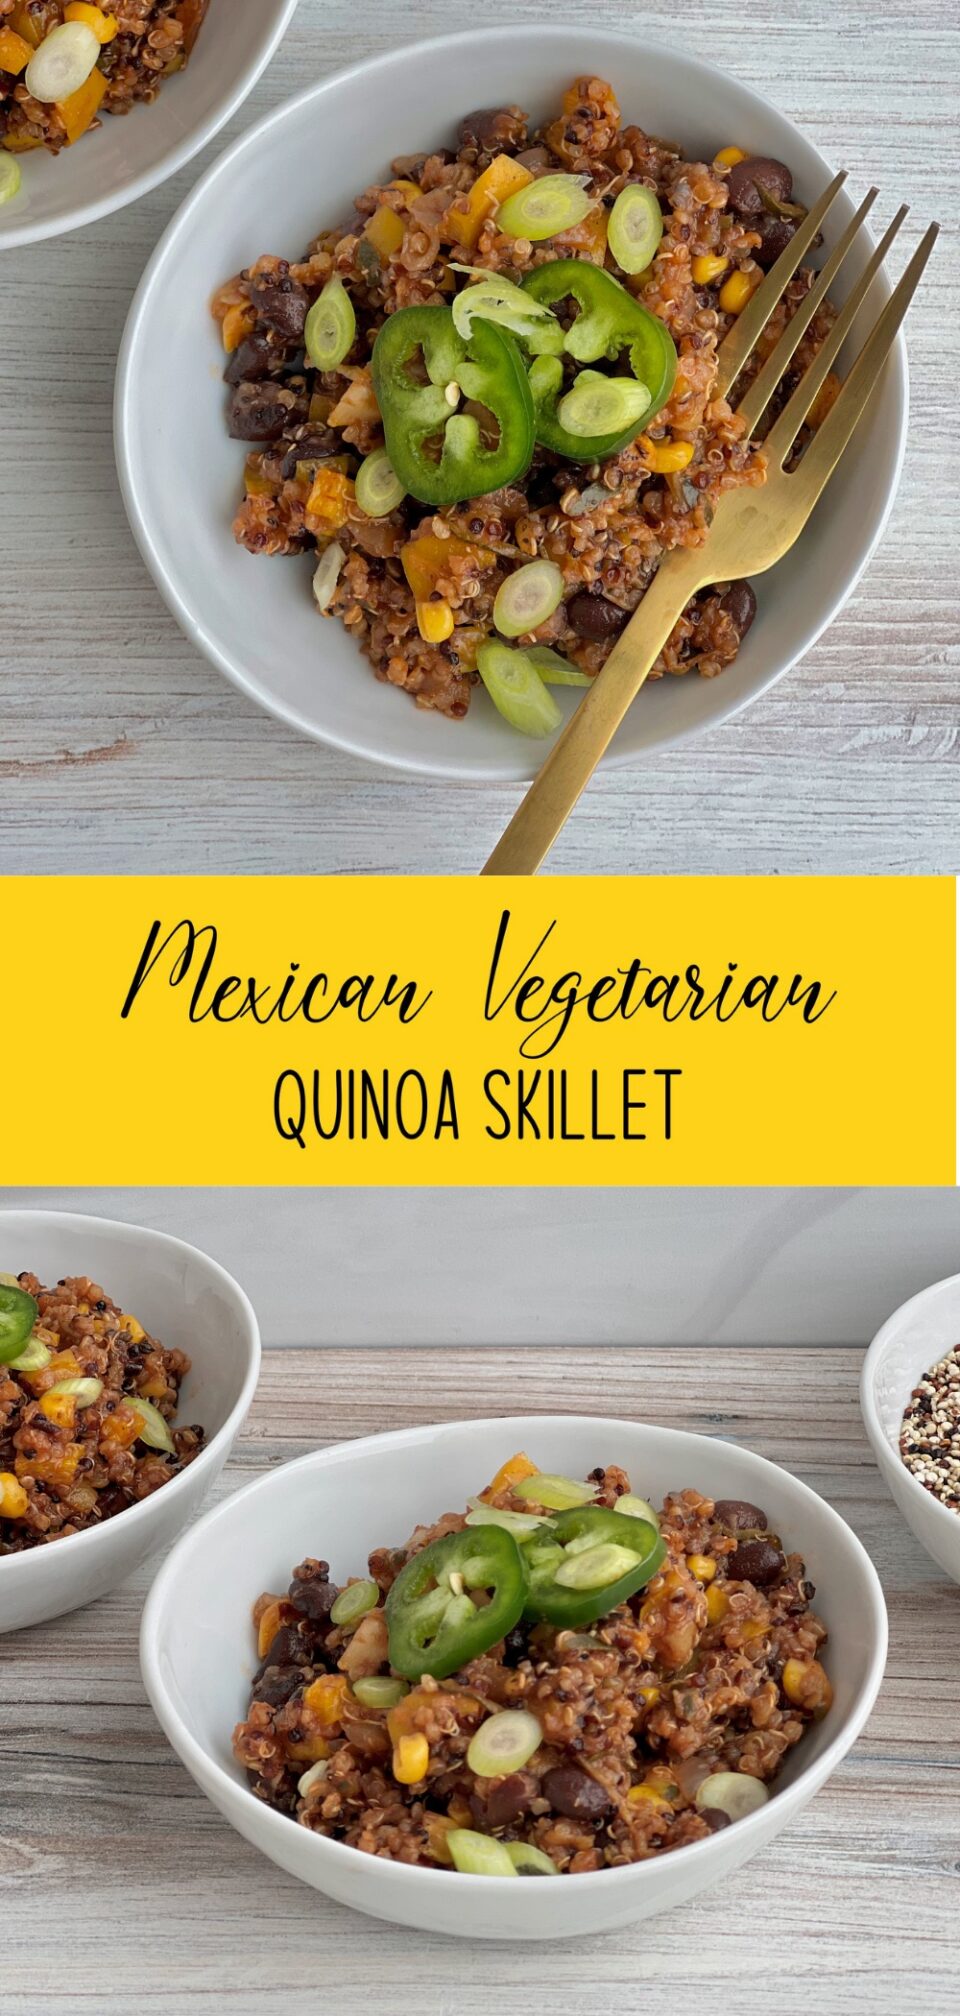 Pictures of Mexican quinoa dish topped with jalapeños